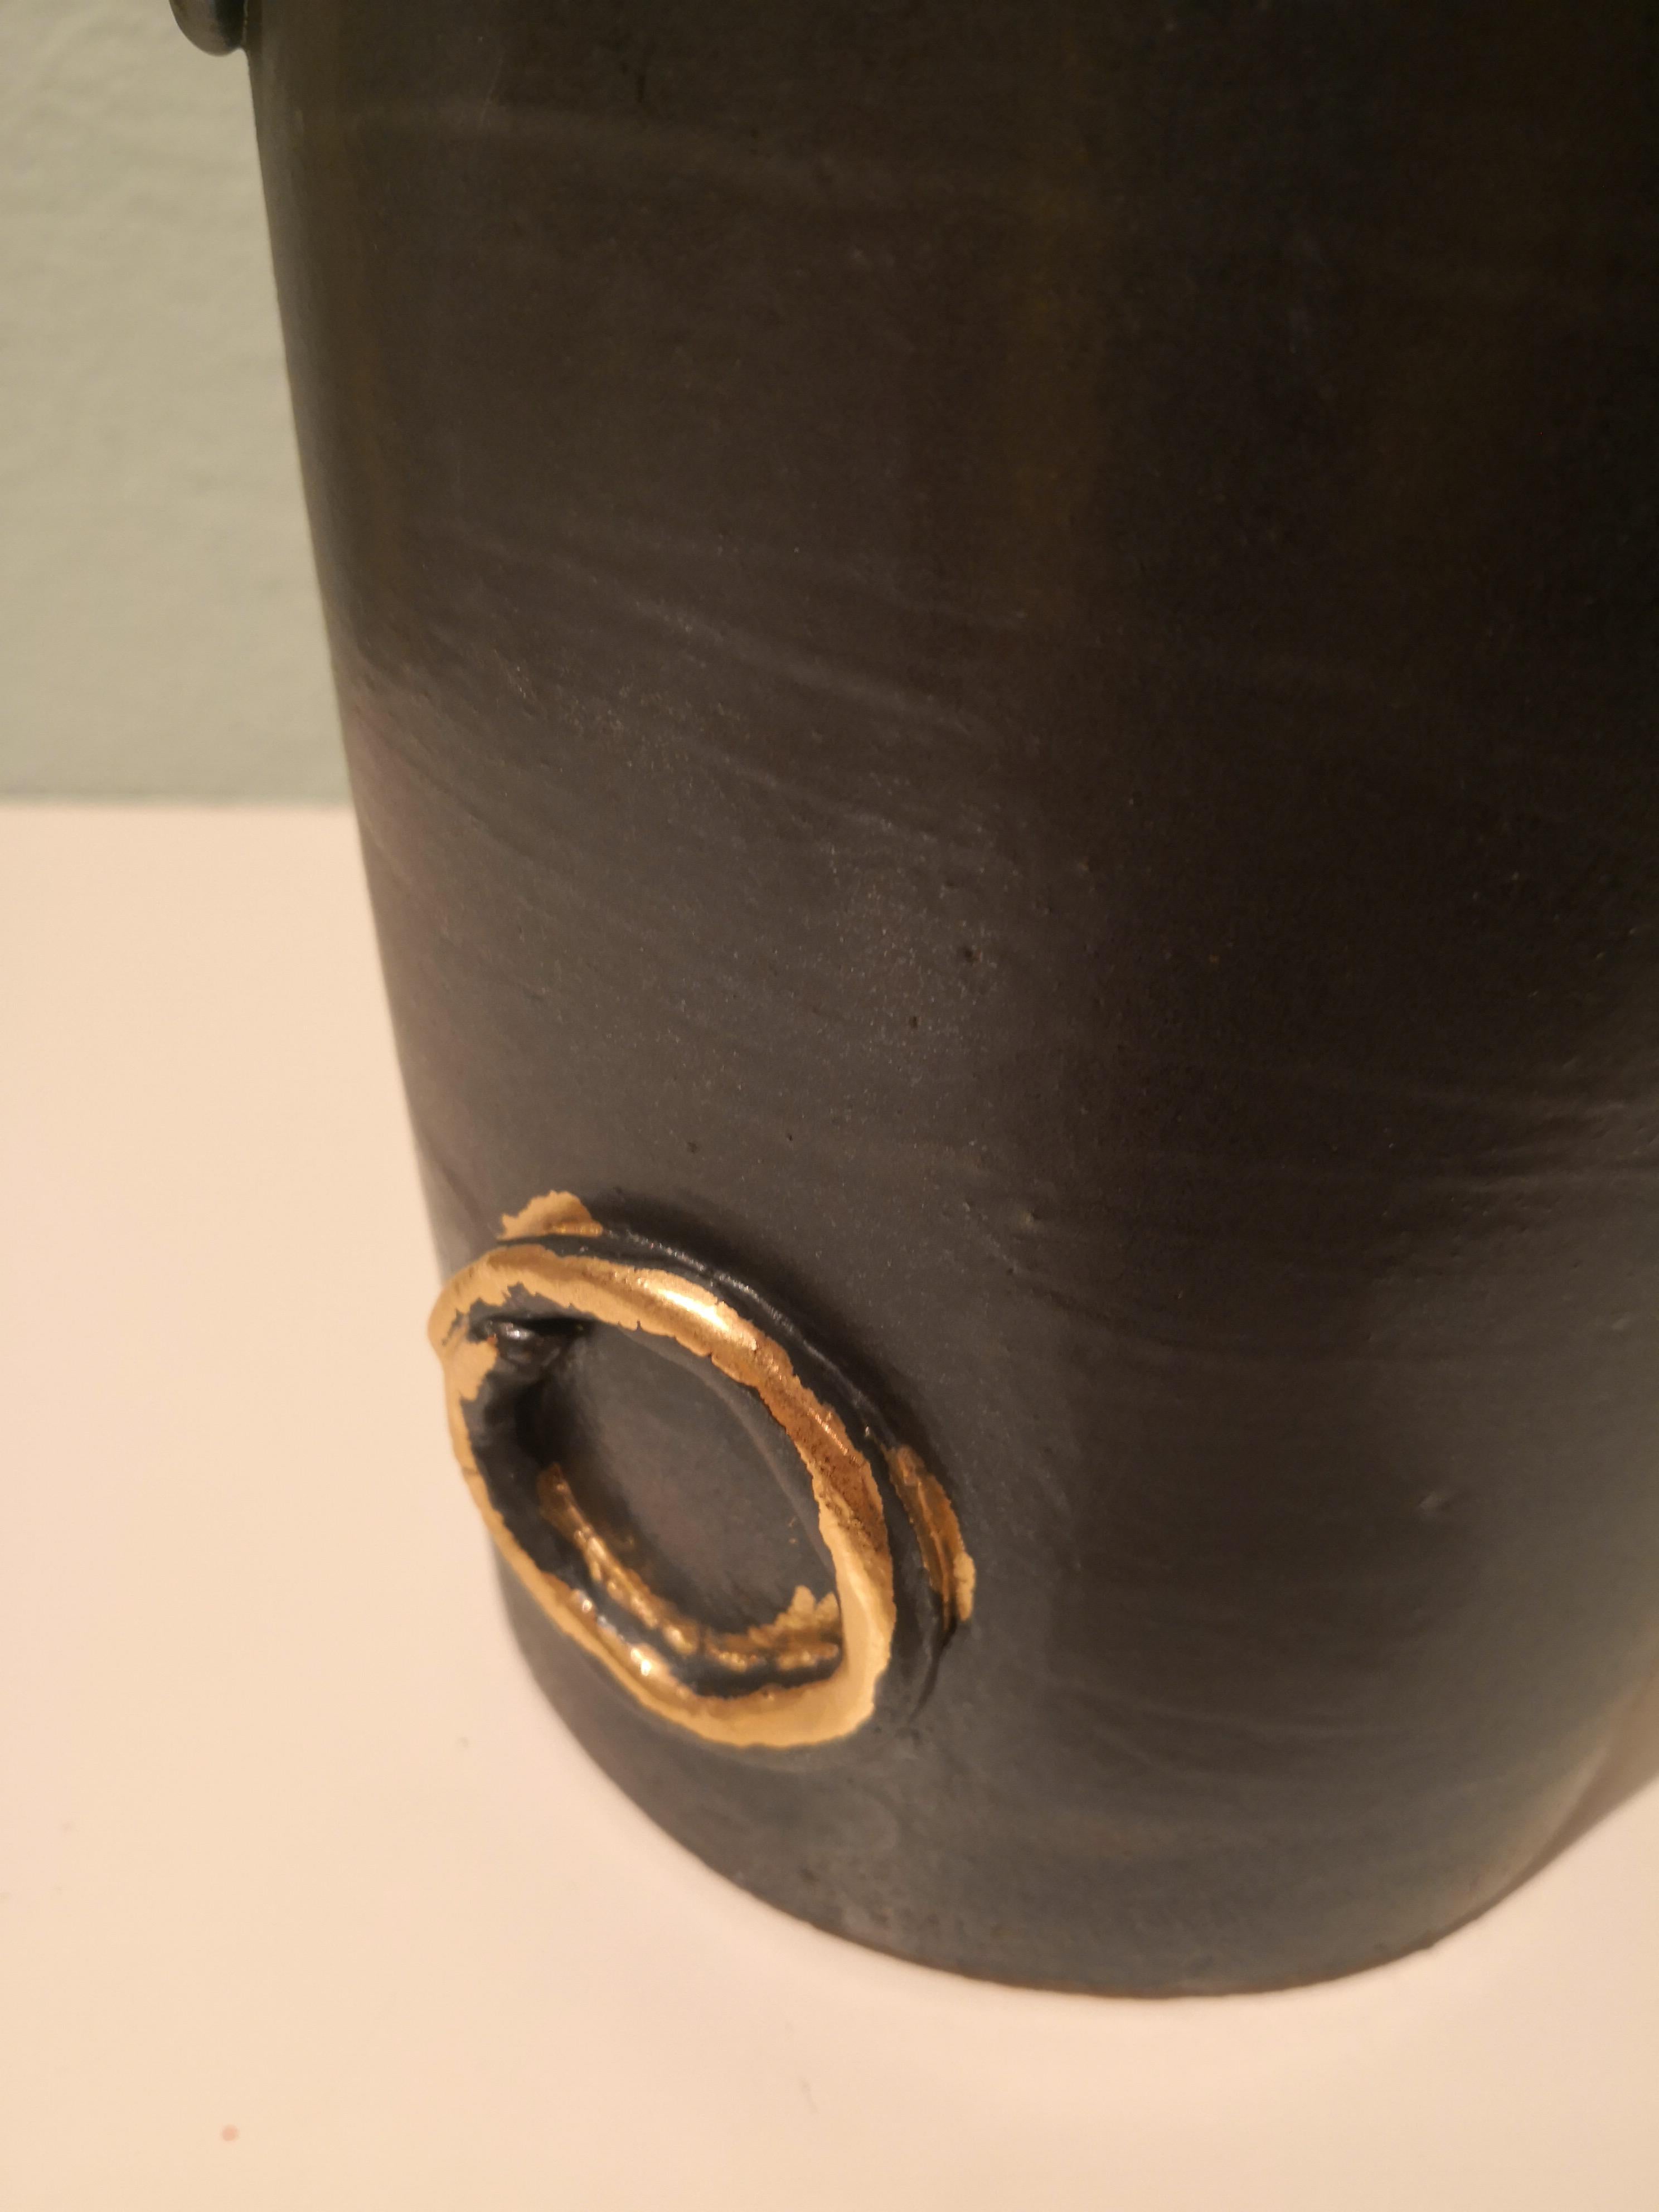 Handmade pottery vase in black earthenware and decorated with handformed golden details. Formed by hand in a strong straight form. Rimed with a gold line. In the bottom signed by the artist. Handmade for Sofina Boutique Kitzbühel. Unique piece in